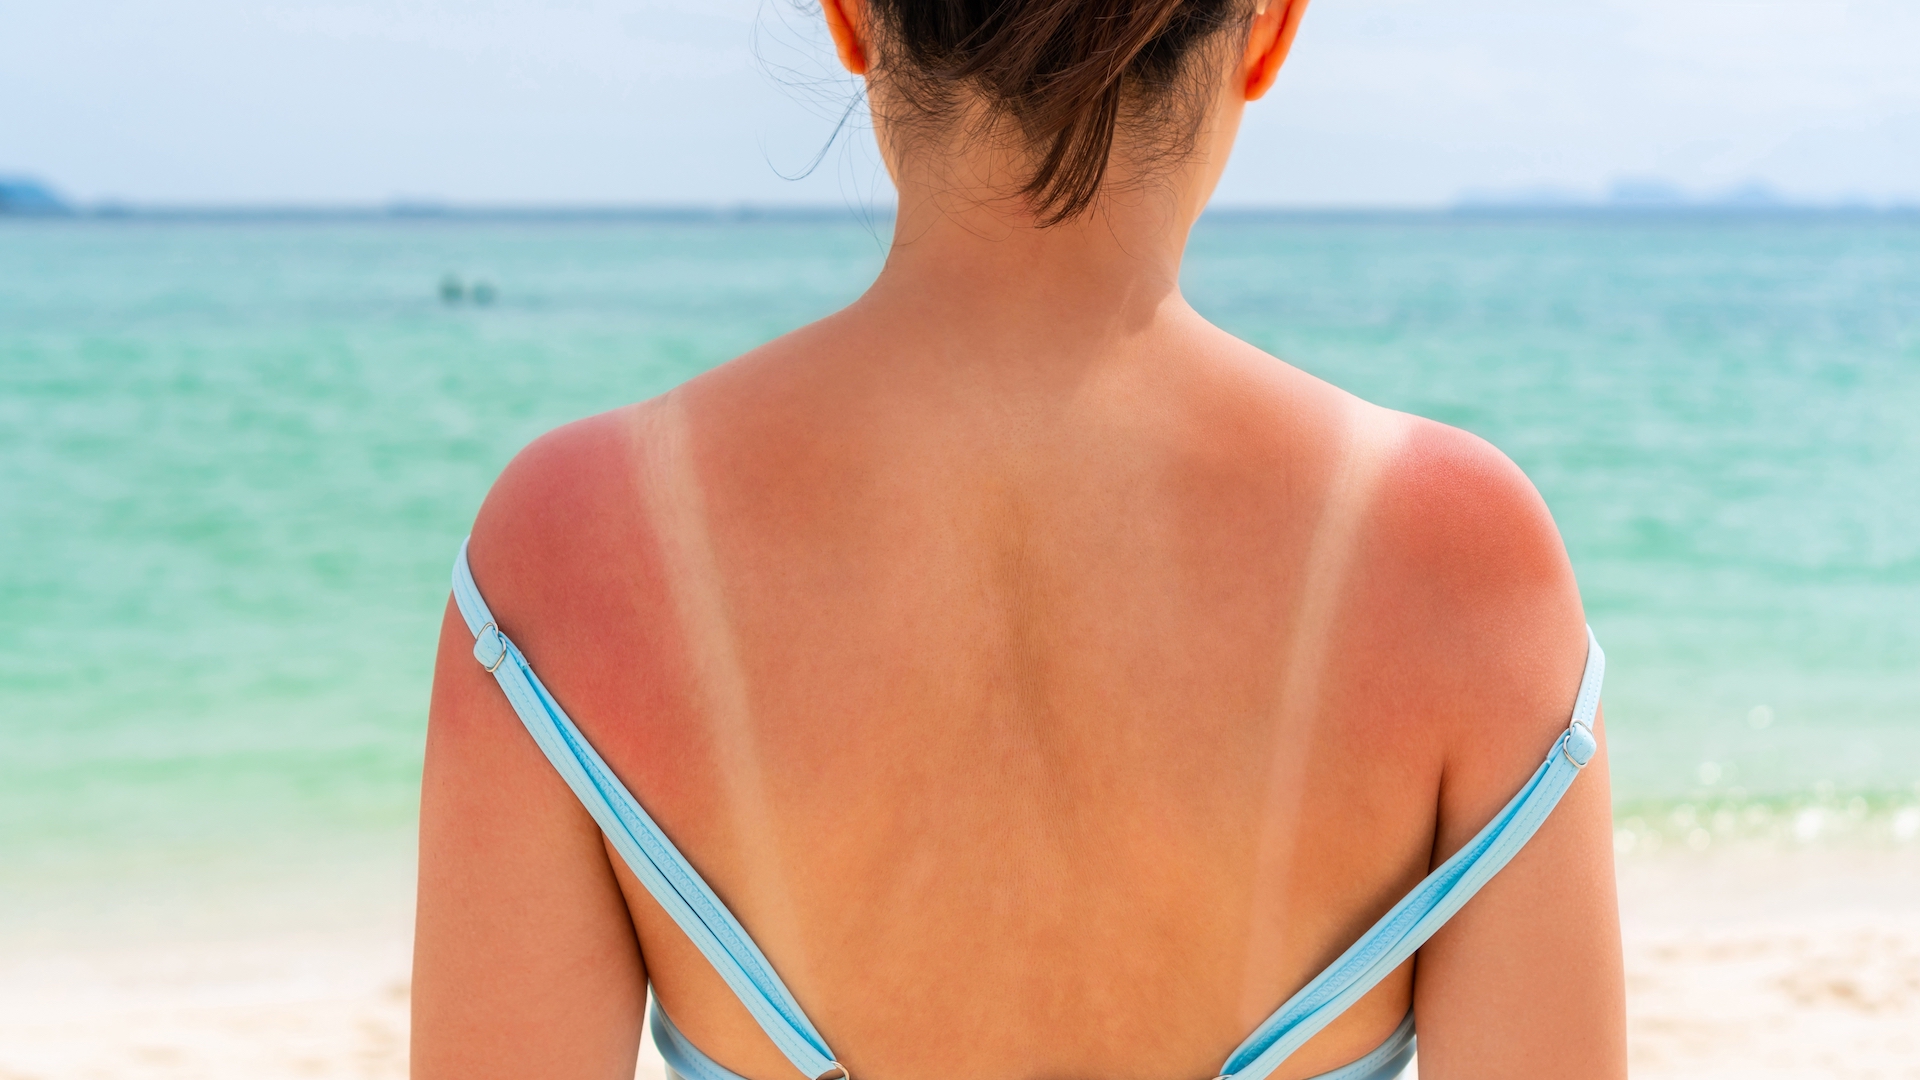 A photograph of a woman with a bad sunburn and tan lines on her back